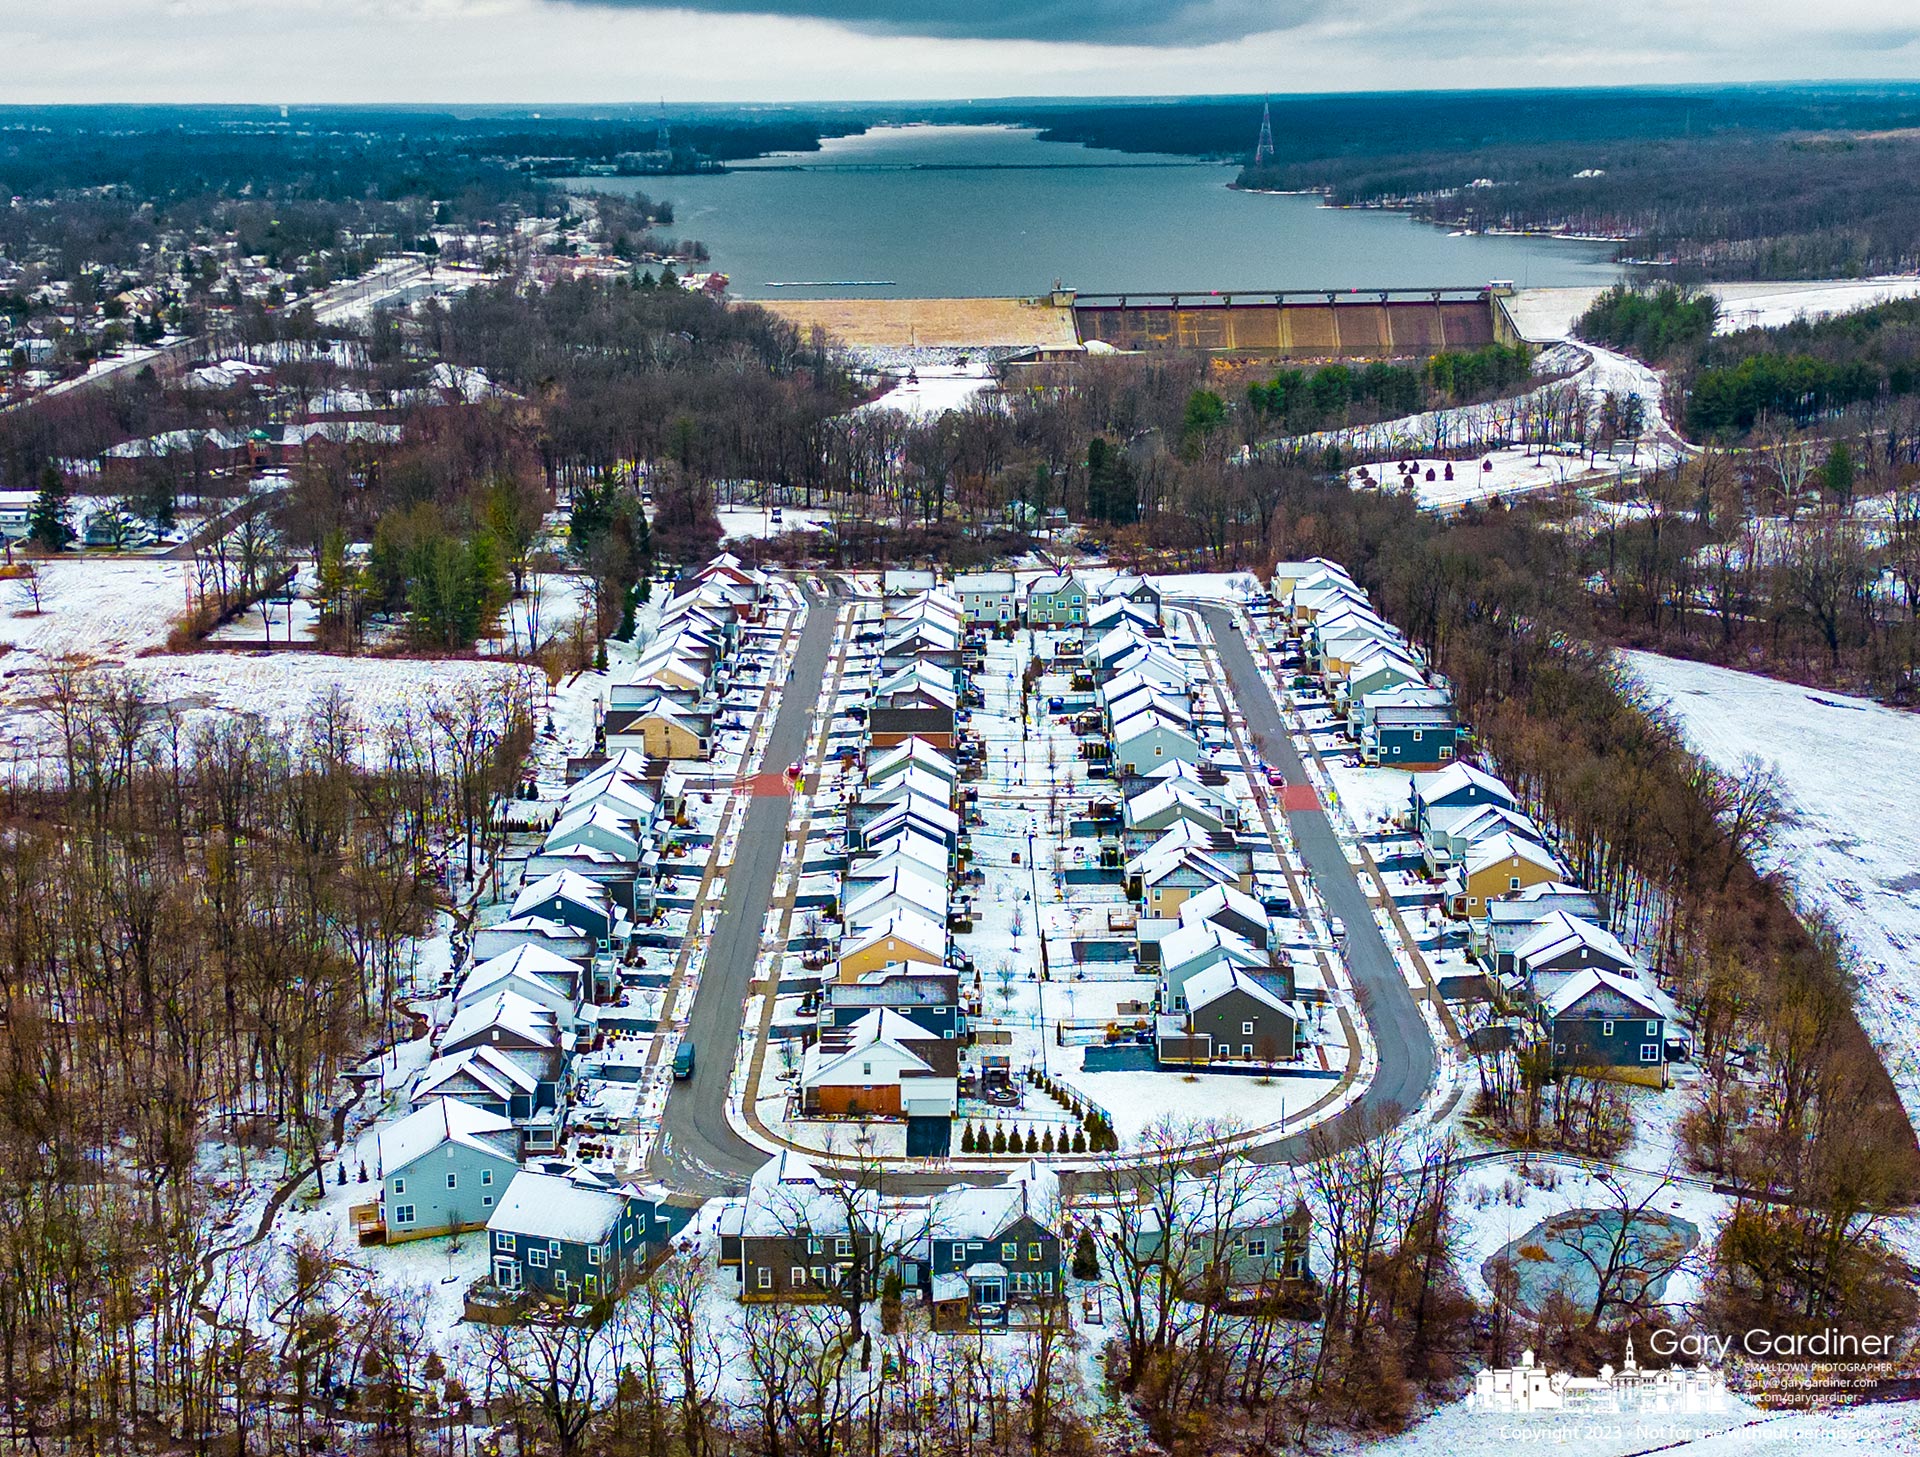 A blanket of snow followed by rain both brightened and dampened Hoover Reservoir and its neighbors including this relatively new area below the dam. My Final Photo for January 24, 2023.